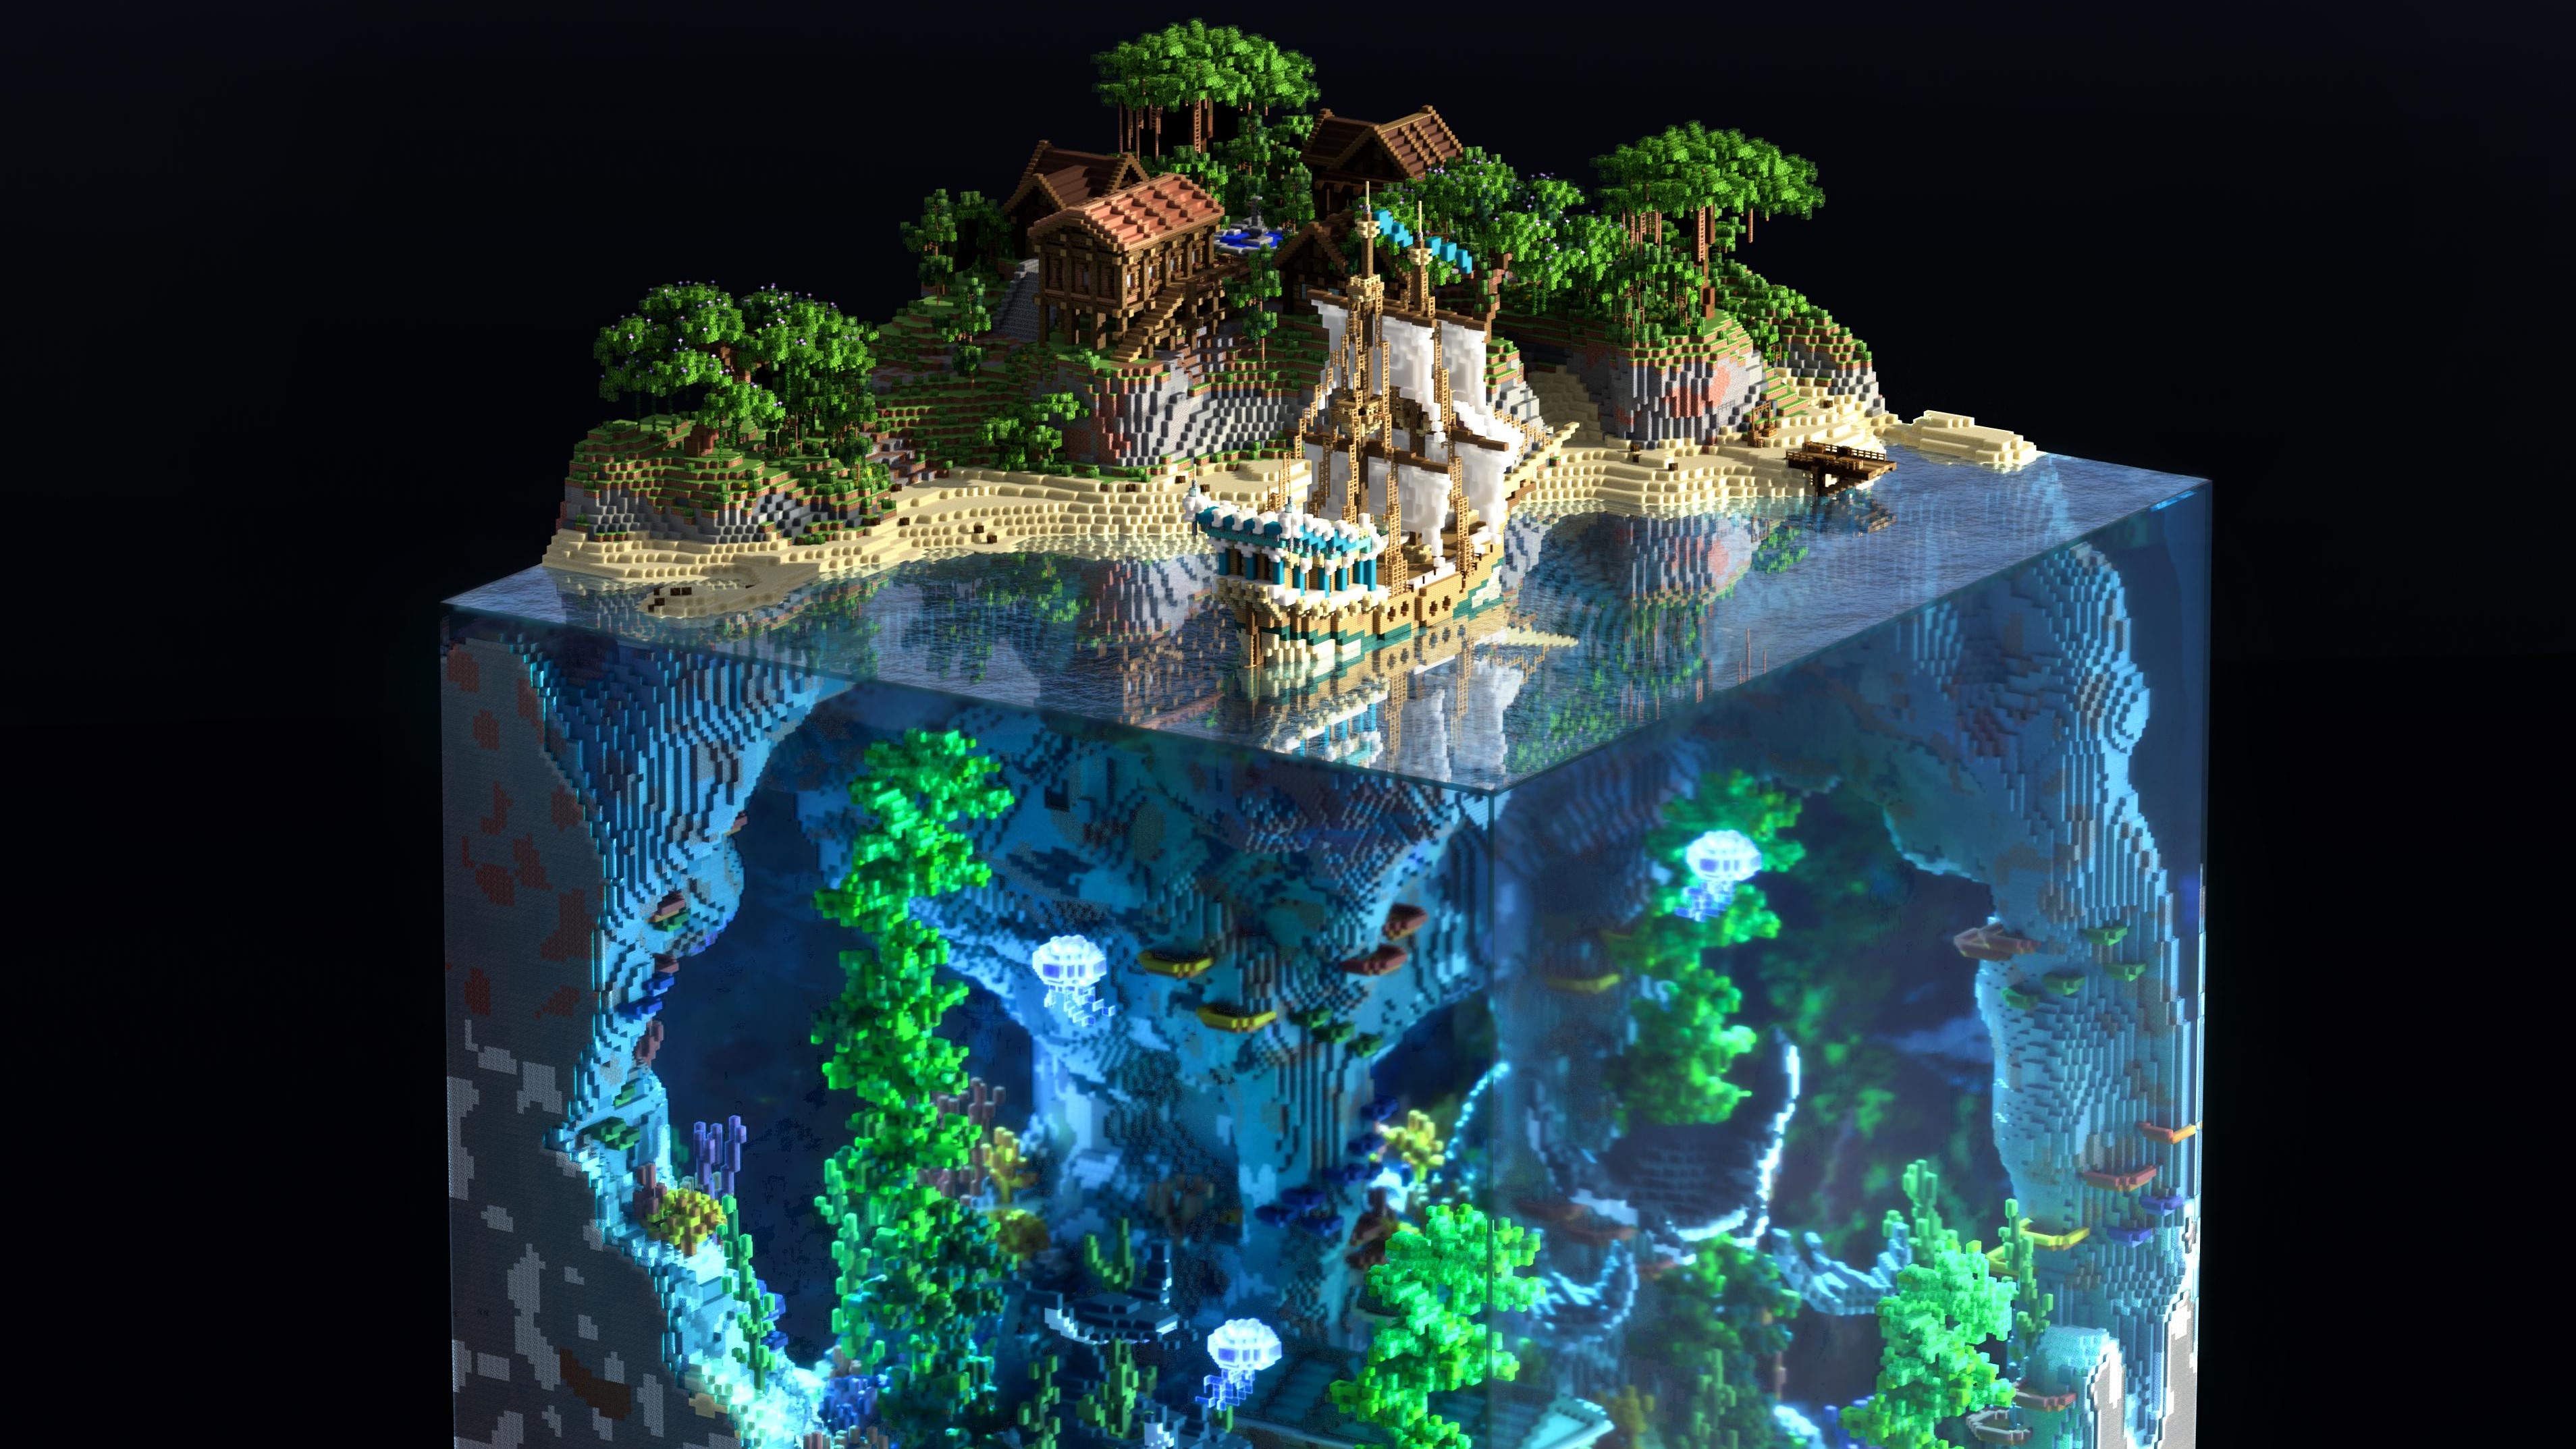  Stop whatever you're doing and look at this incredible Minecraft world built inside a block 